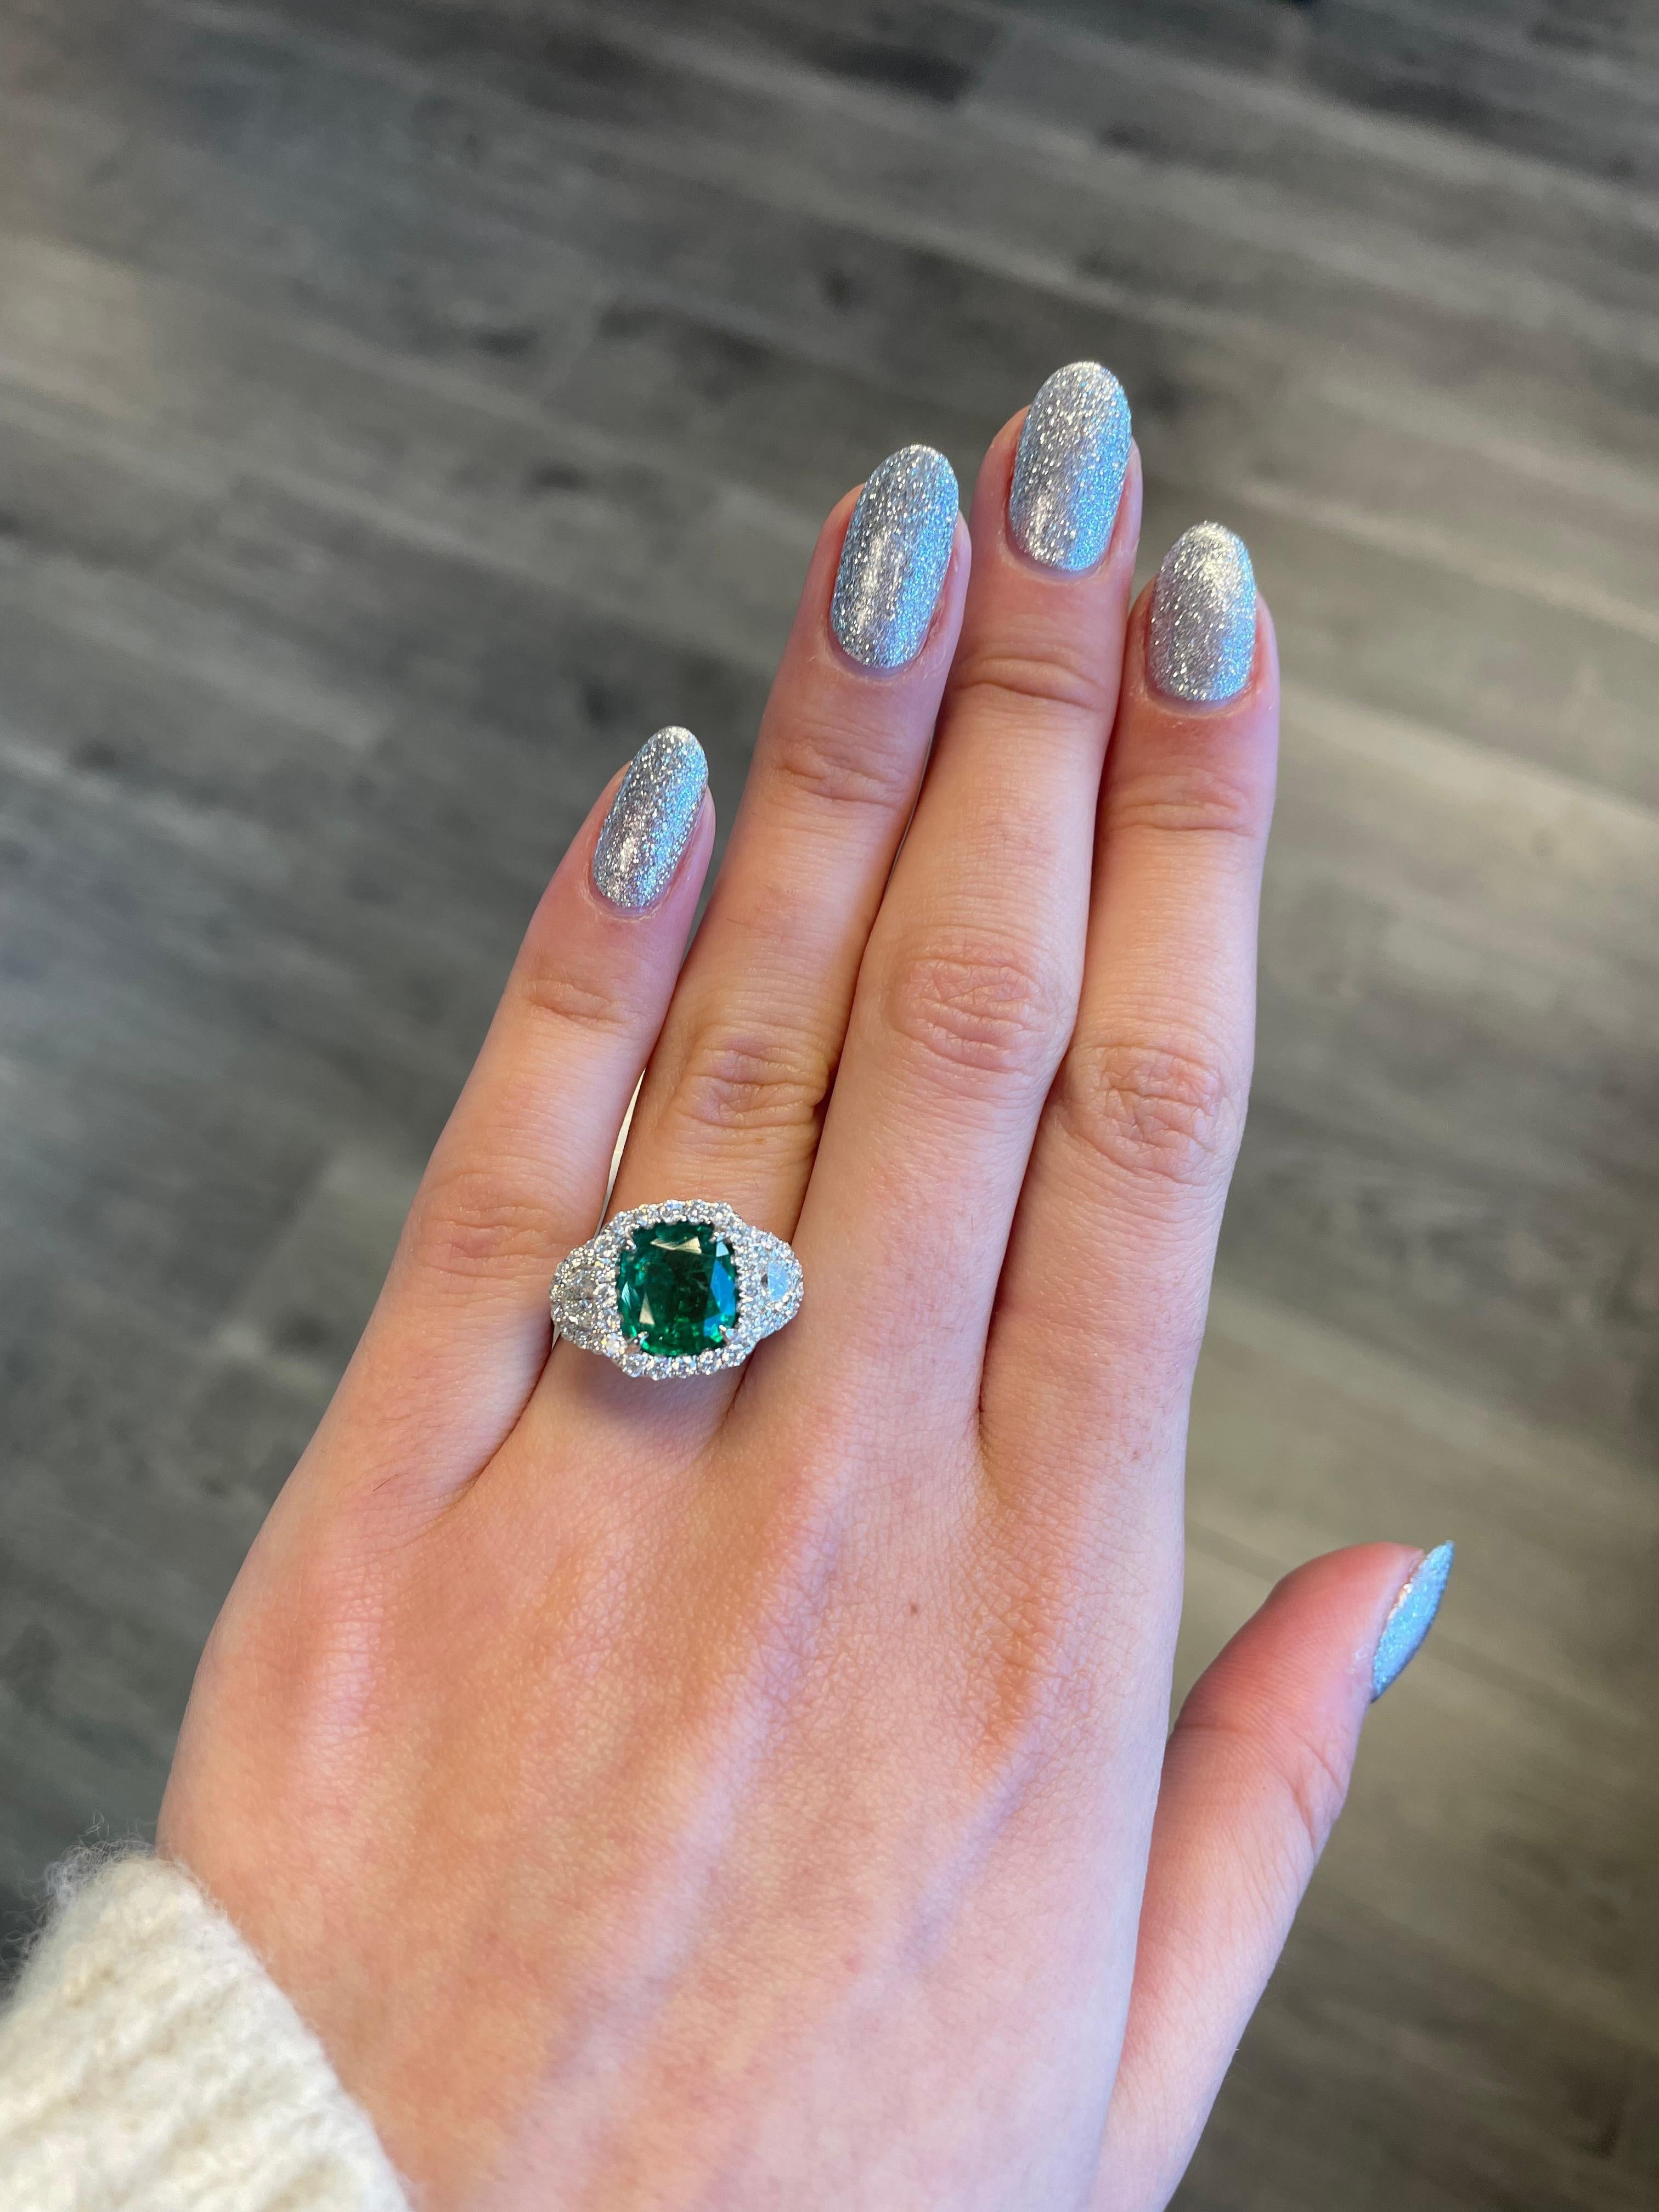 Stunning emerald and diamond three stone ring with halo.
3.67 carats total gemstone weight.
2.43 carat cushion emerald, apx F2. 2 half moons with 50 round brilliant diamonds, 1.24 carats. Approximately G/H color and VS-SI clarity. 18k white gold,